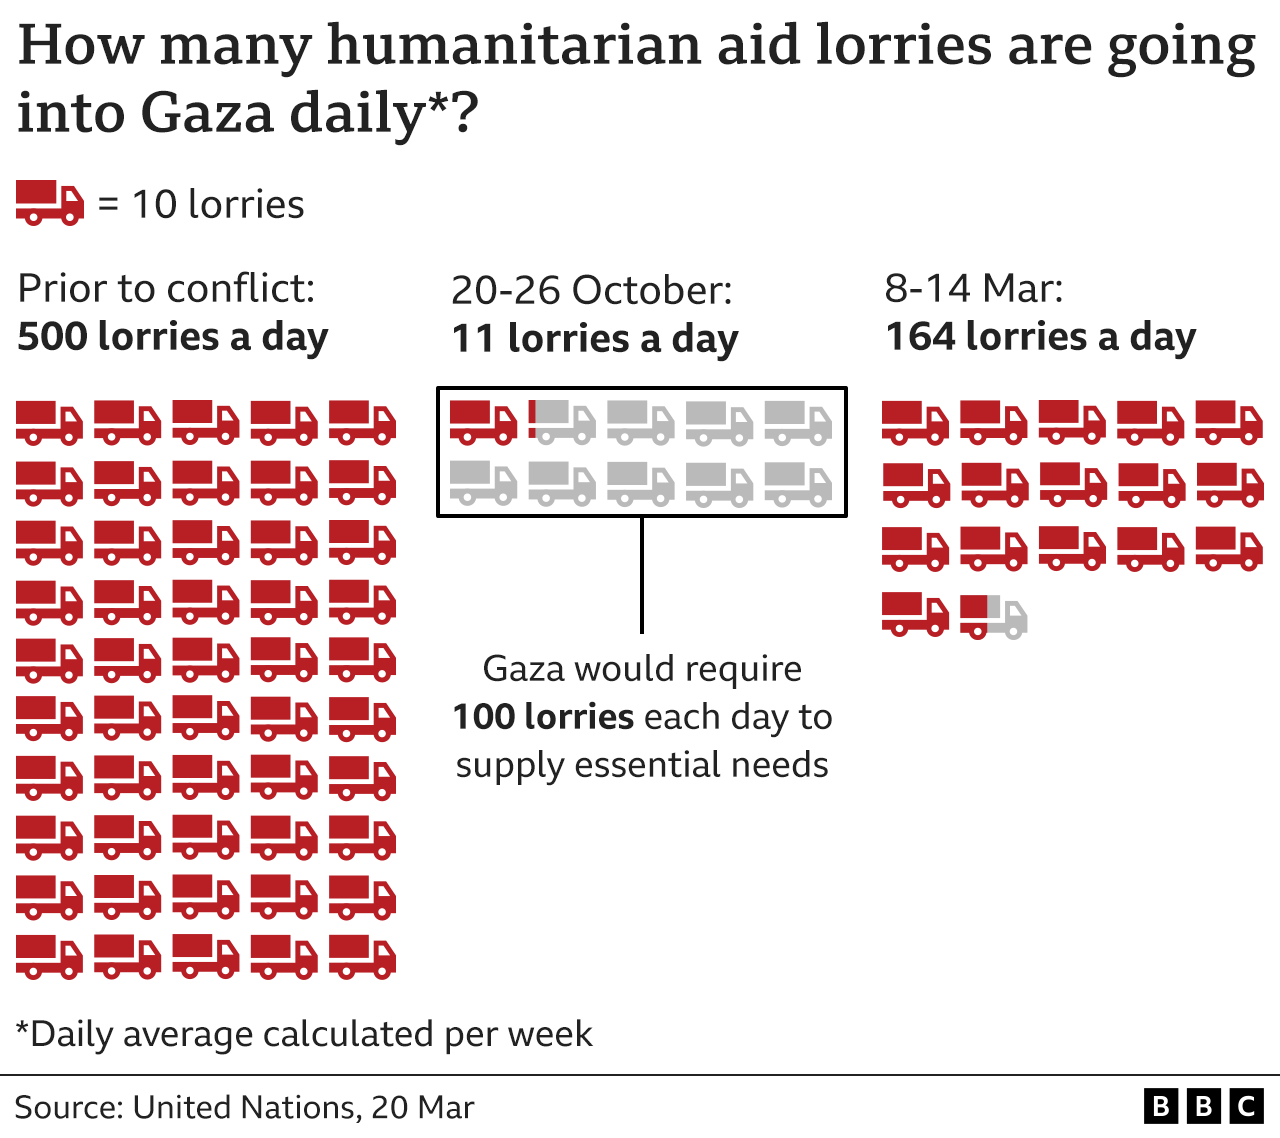 Graphic showing the number of aid lorries going into Gaza is now around 164 a day. Before the war it was 400-500